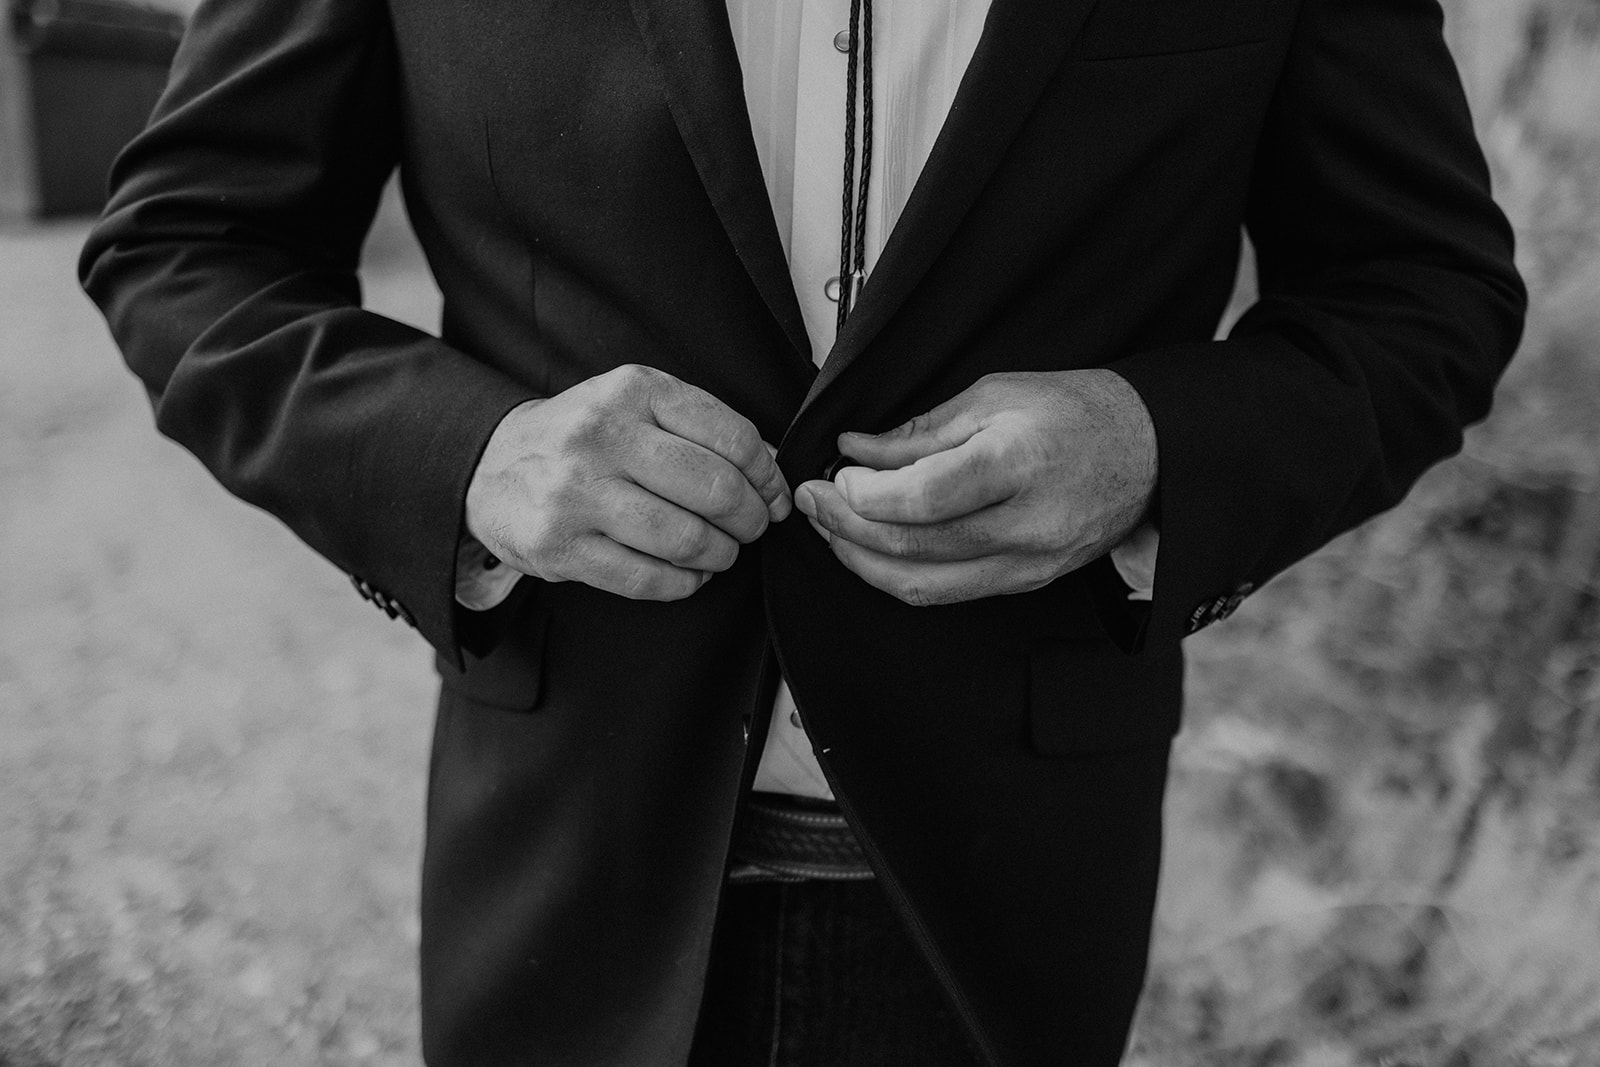 groom buttoning his jacket